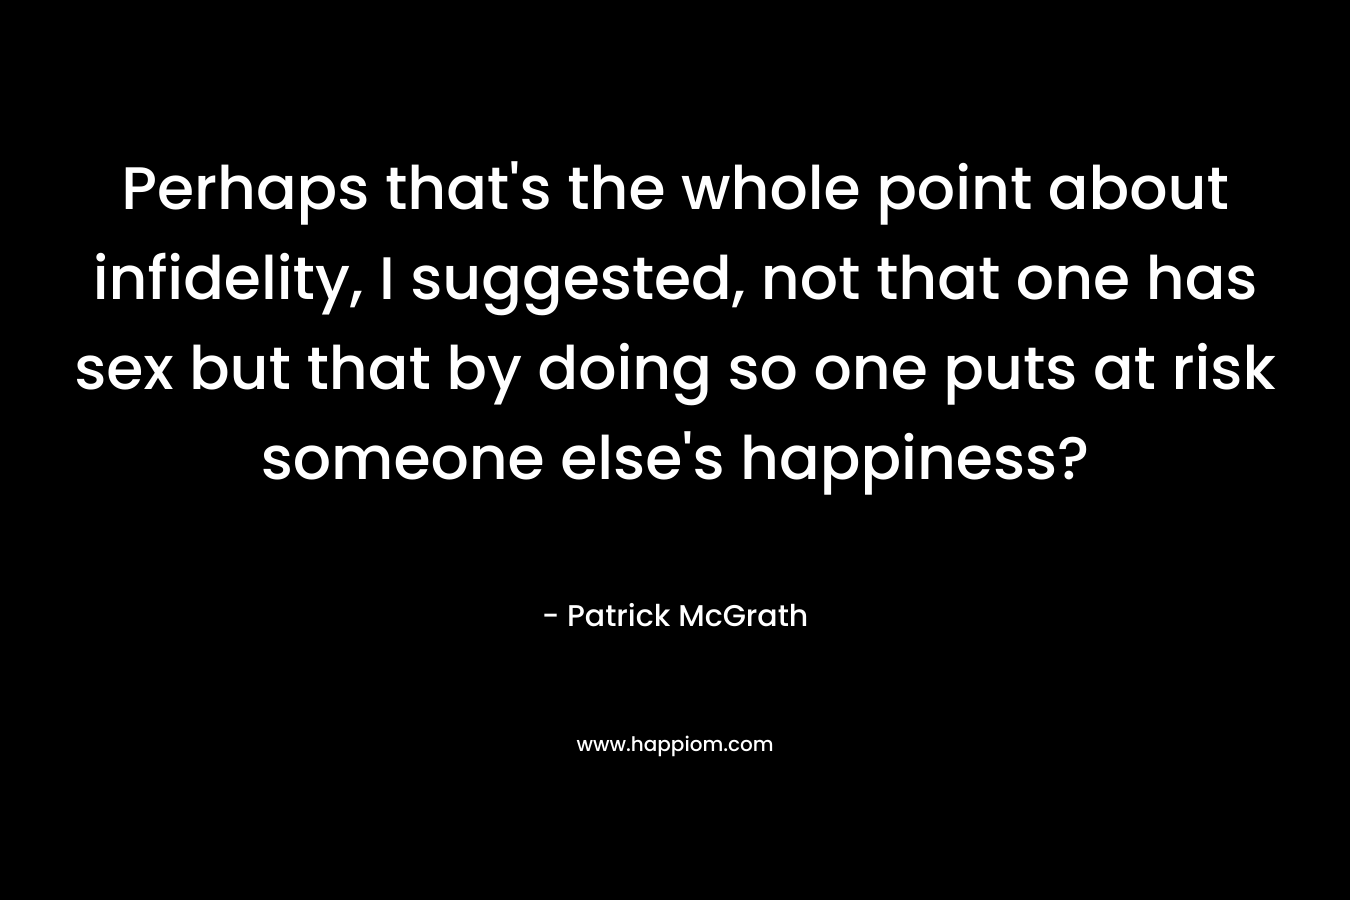 Perhaps that’s the whole point about infidelity, I suggested, not that one has sex but that by doing so one puts at risk someone else’s happiness? – Patrick McGrath